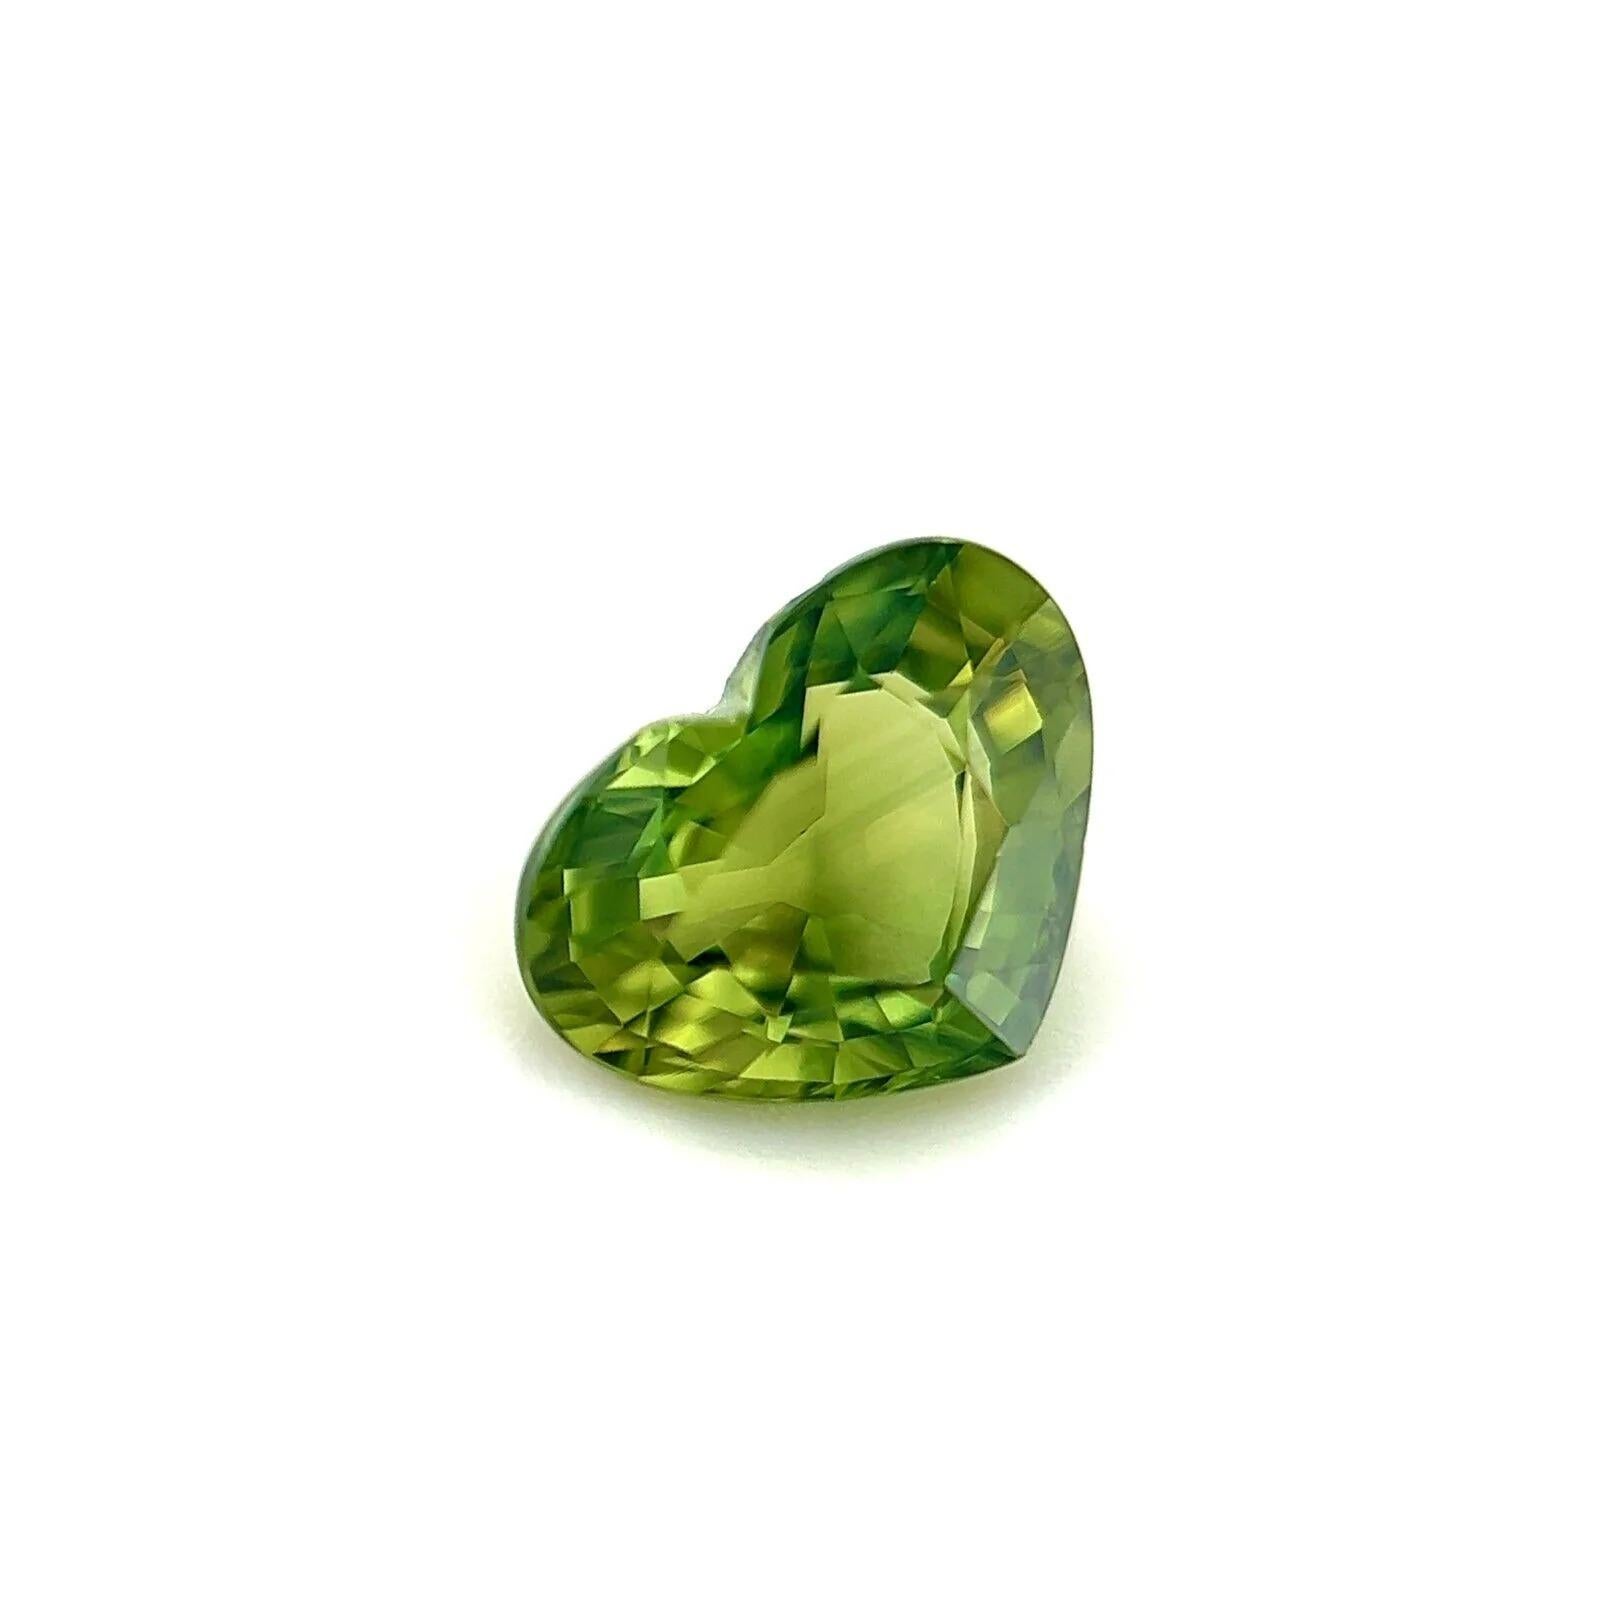 Fine Green Colour Australian Sapphire 1.20ct Heart Cut Loose Gemstone 7.2x5.5mm

Natural Green Sapphire Heart Cut Gem.
1.20 Carat with a beautiful and unique green colour. Very rare and stunning to see. Has very good clarity, a very clean stone.